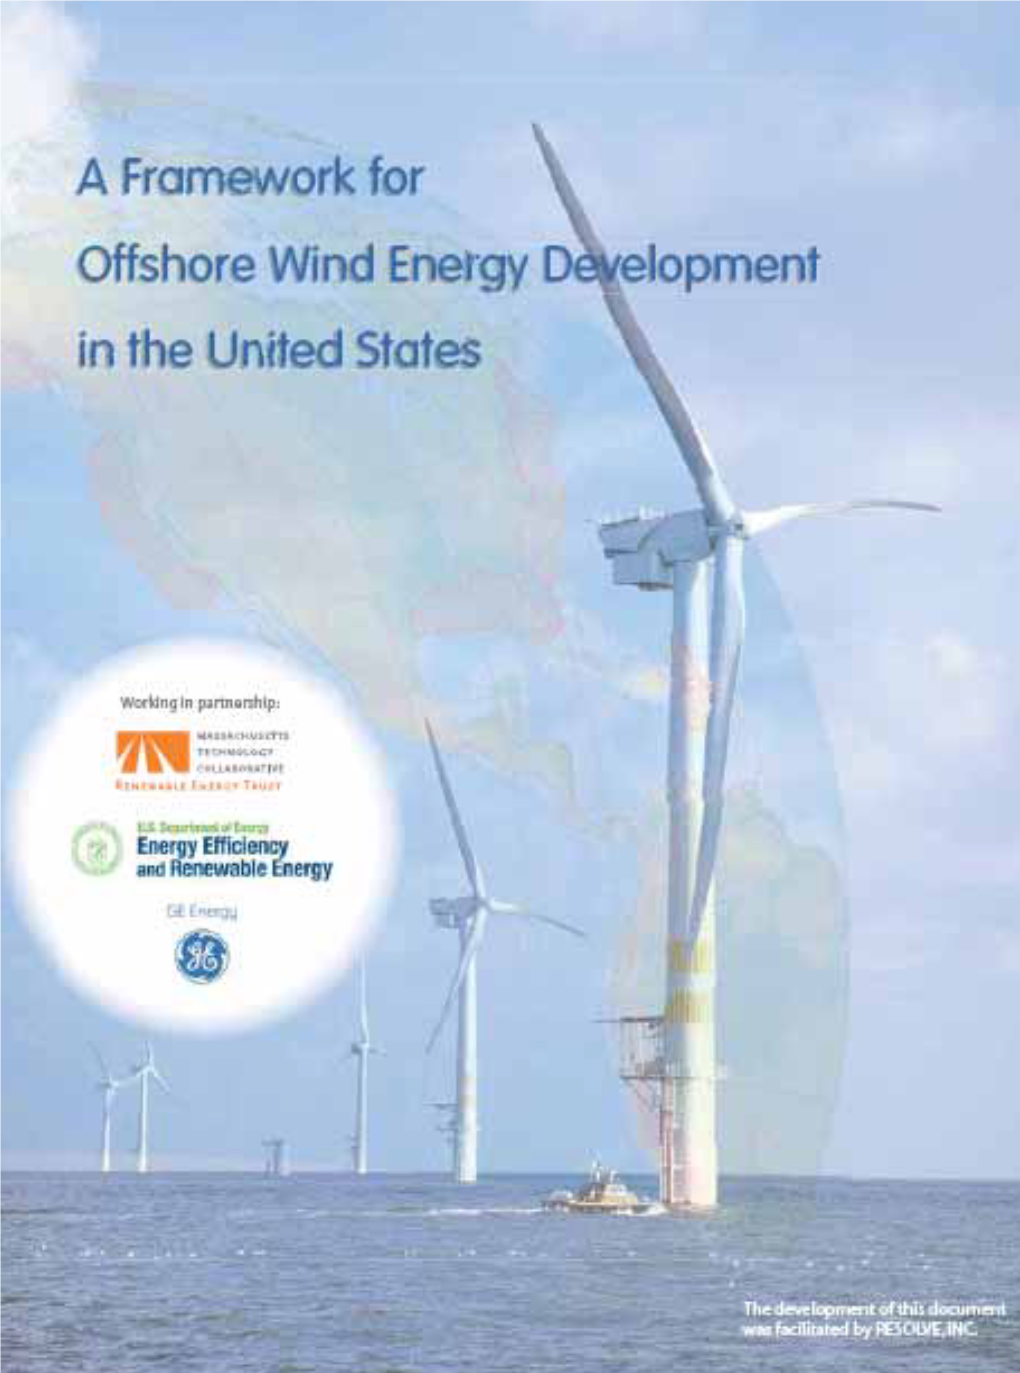 A Framework for Offshore Wind Energy Development in the United States